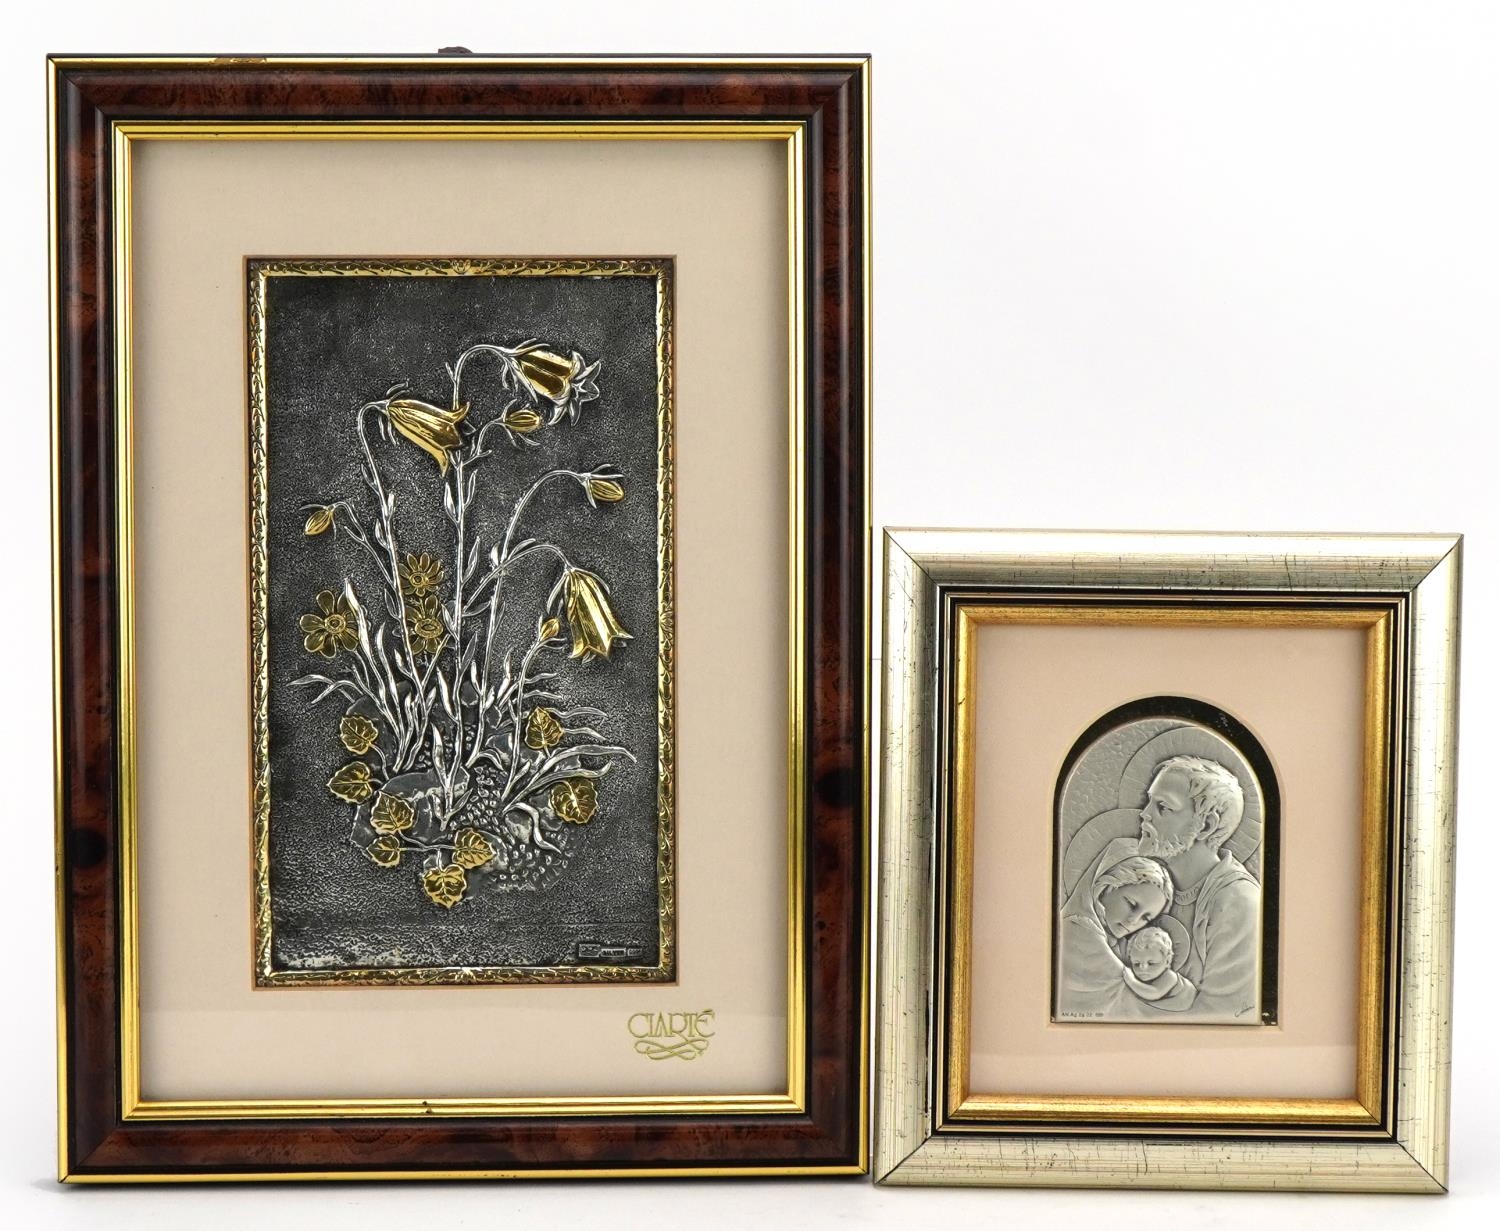 Two silver plaques embossed with religious figures by Obrazek and stylised tulips with 999 silver